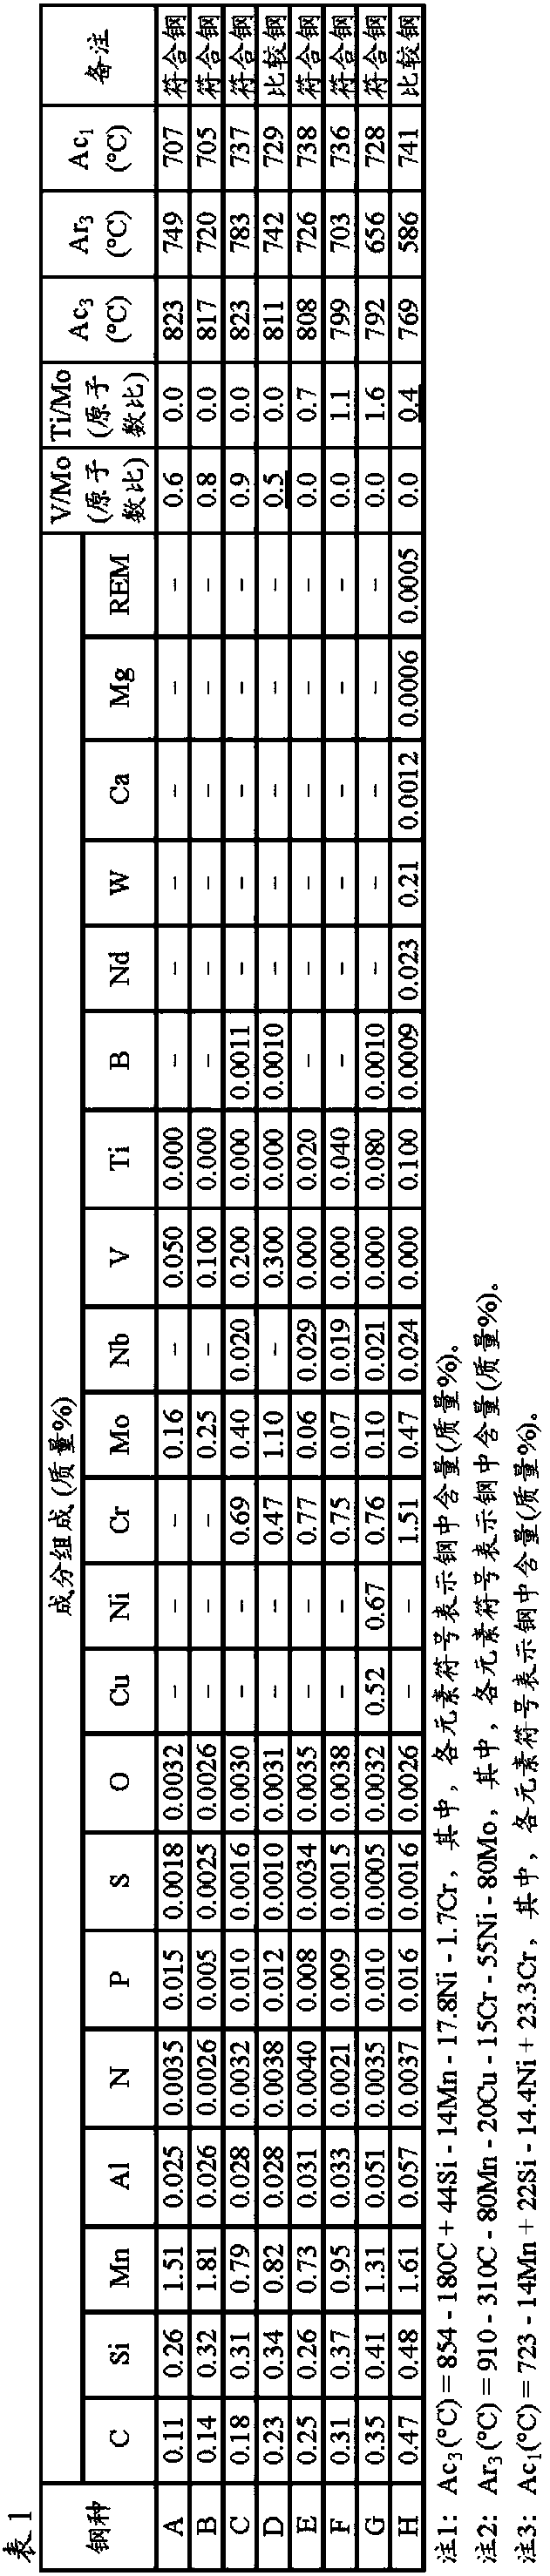 Steel structure for hydrogen which exhibits excellent hydrogen embrittlement resistance properties in high-pressure hydrogen gas, and method for producing same